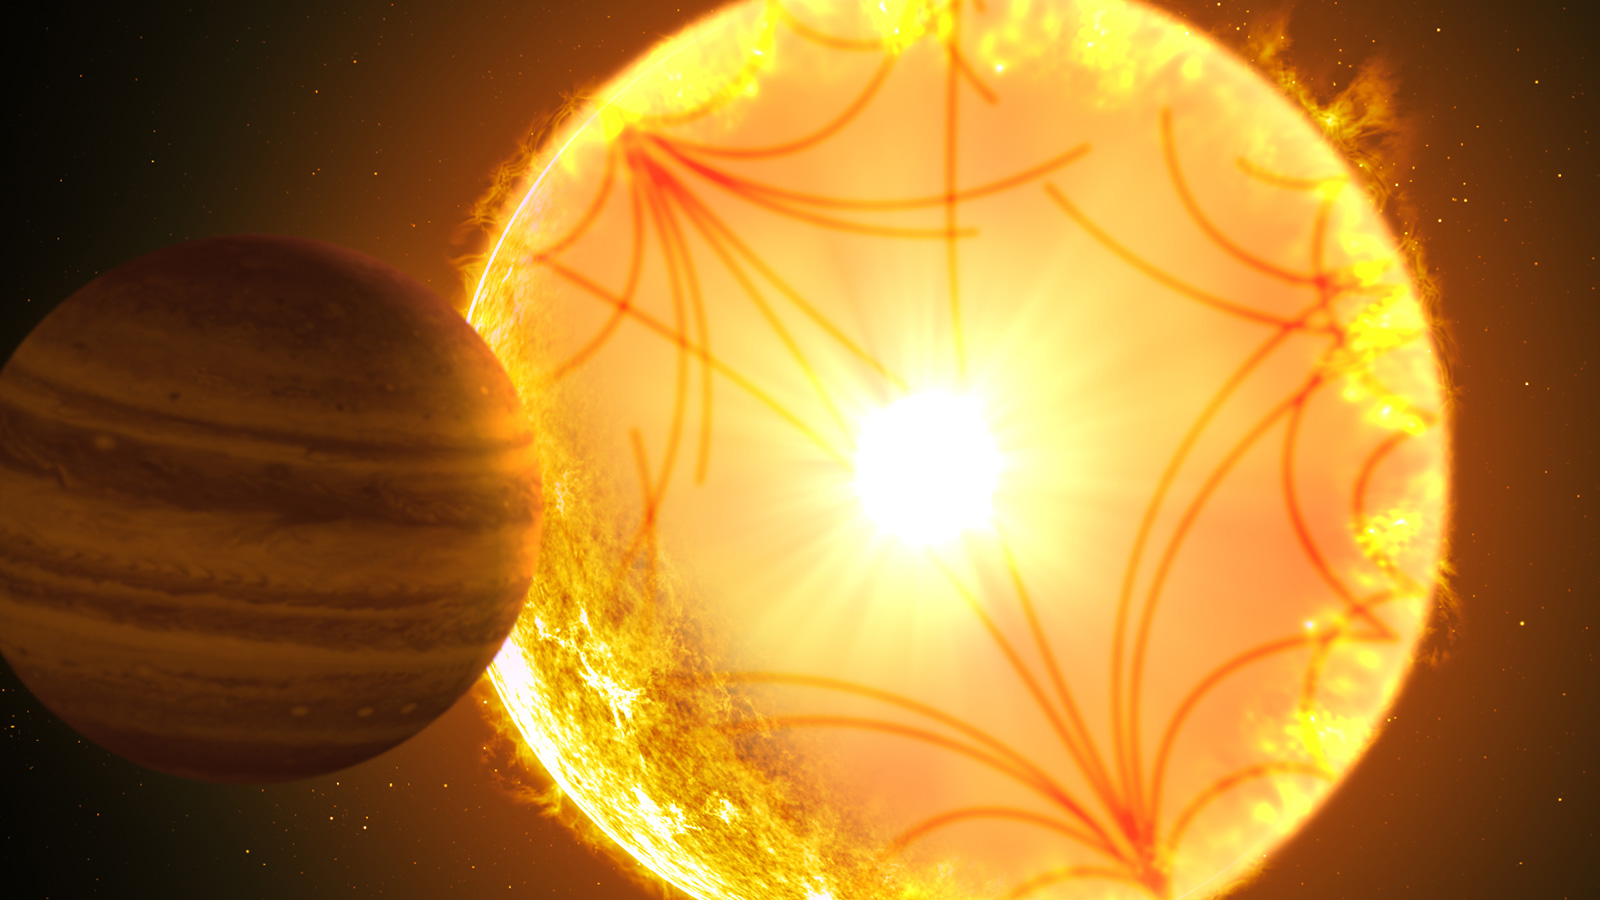 Exoplanet Kepler be obliterated upon collision with the star